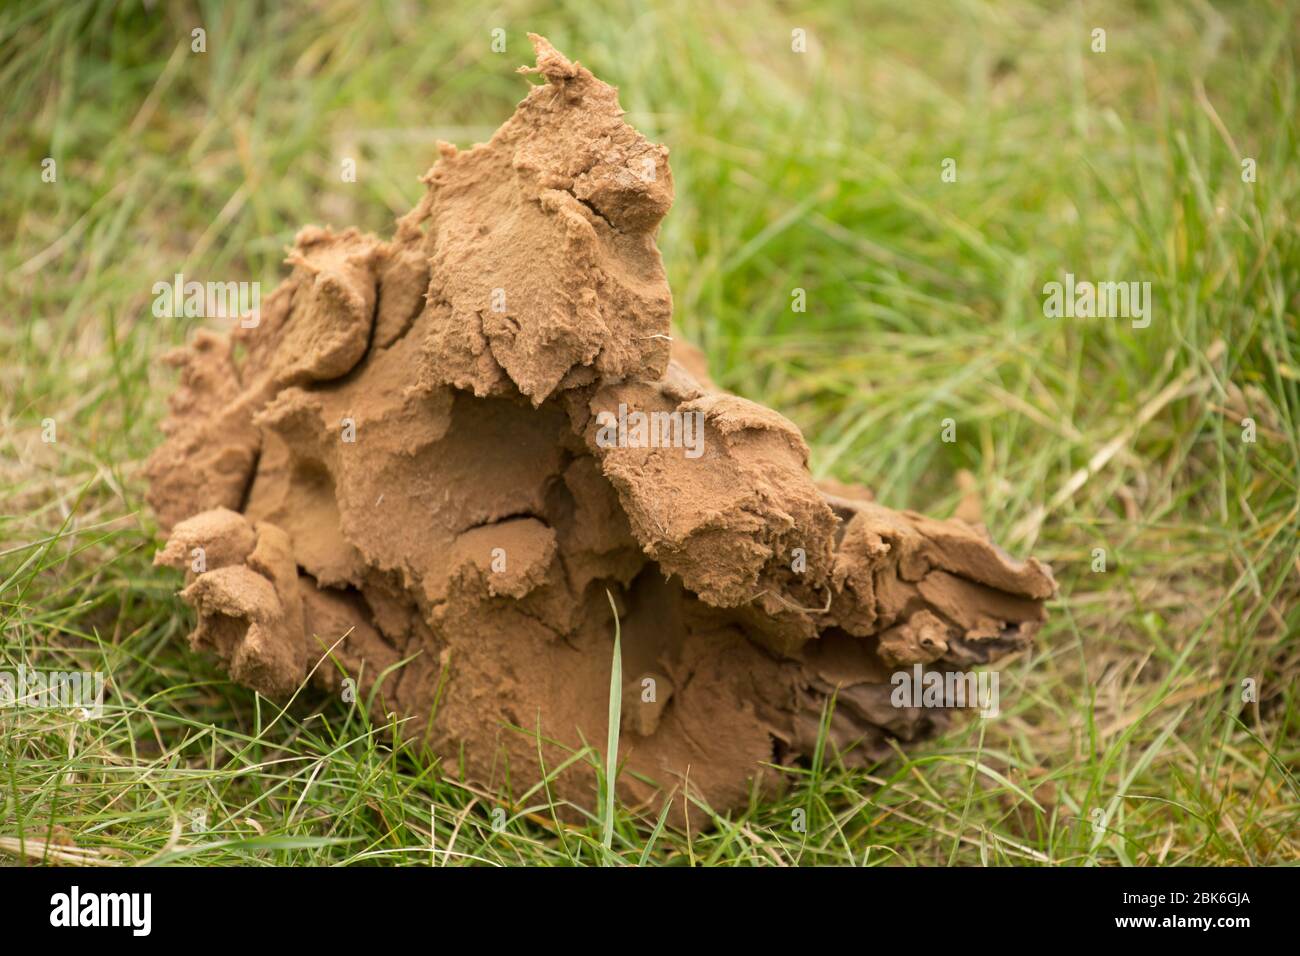 The remains of a giant puffball, Calvatia gigantea, after it has ripened and shed its spores. Dorset England UK GB Stock Photo